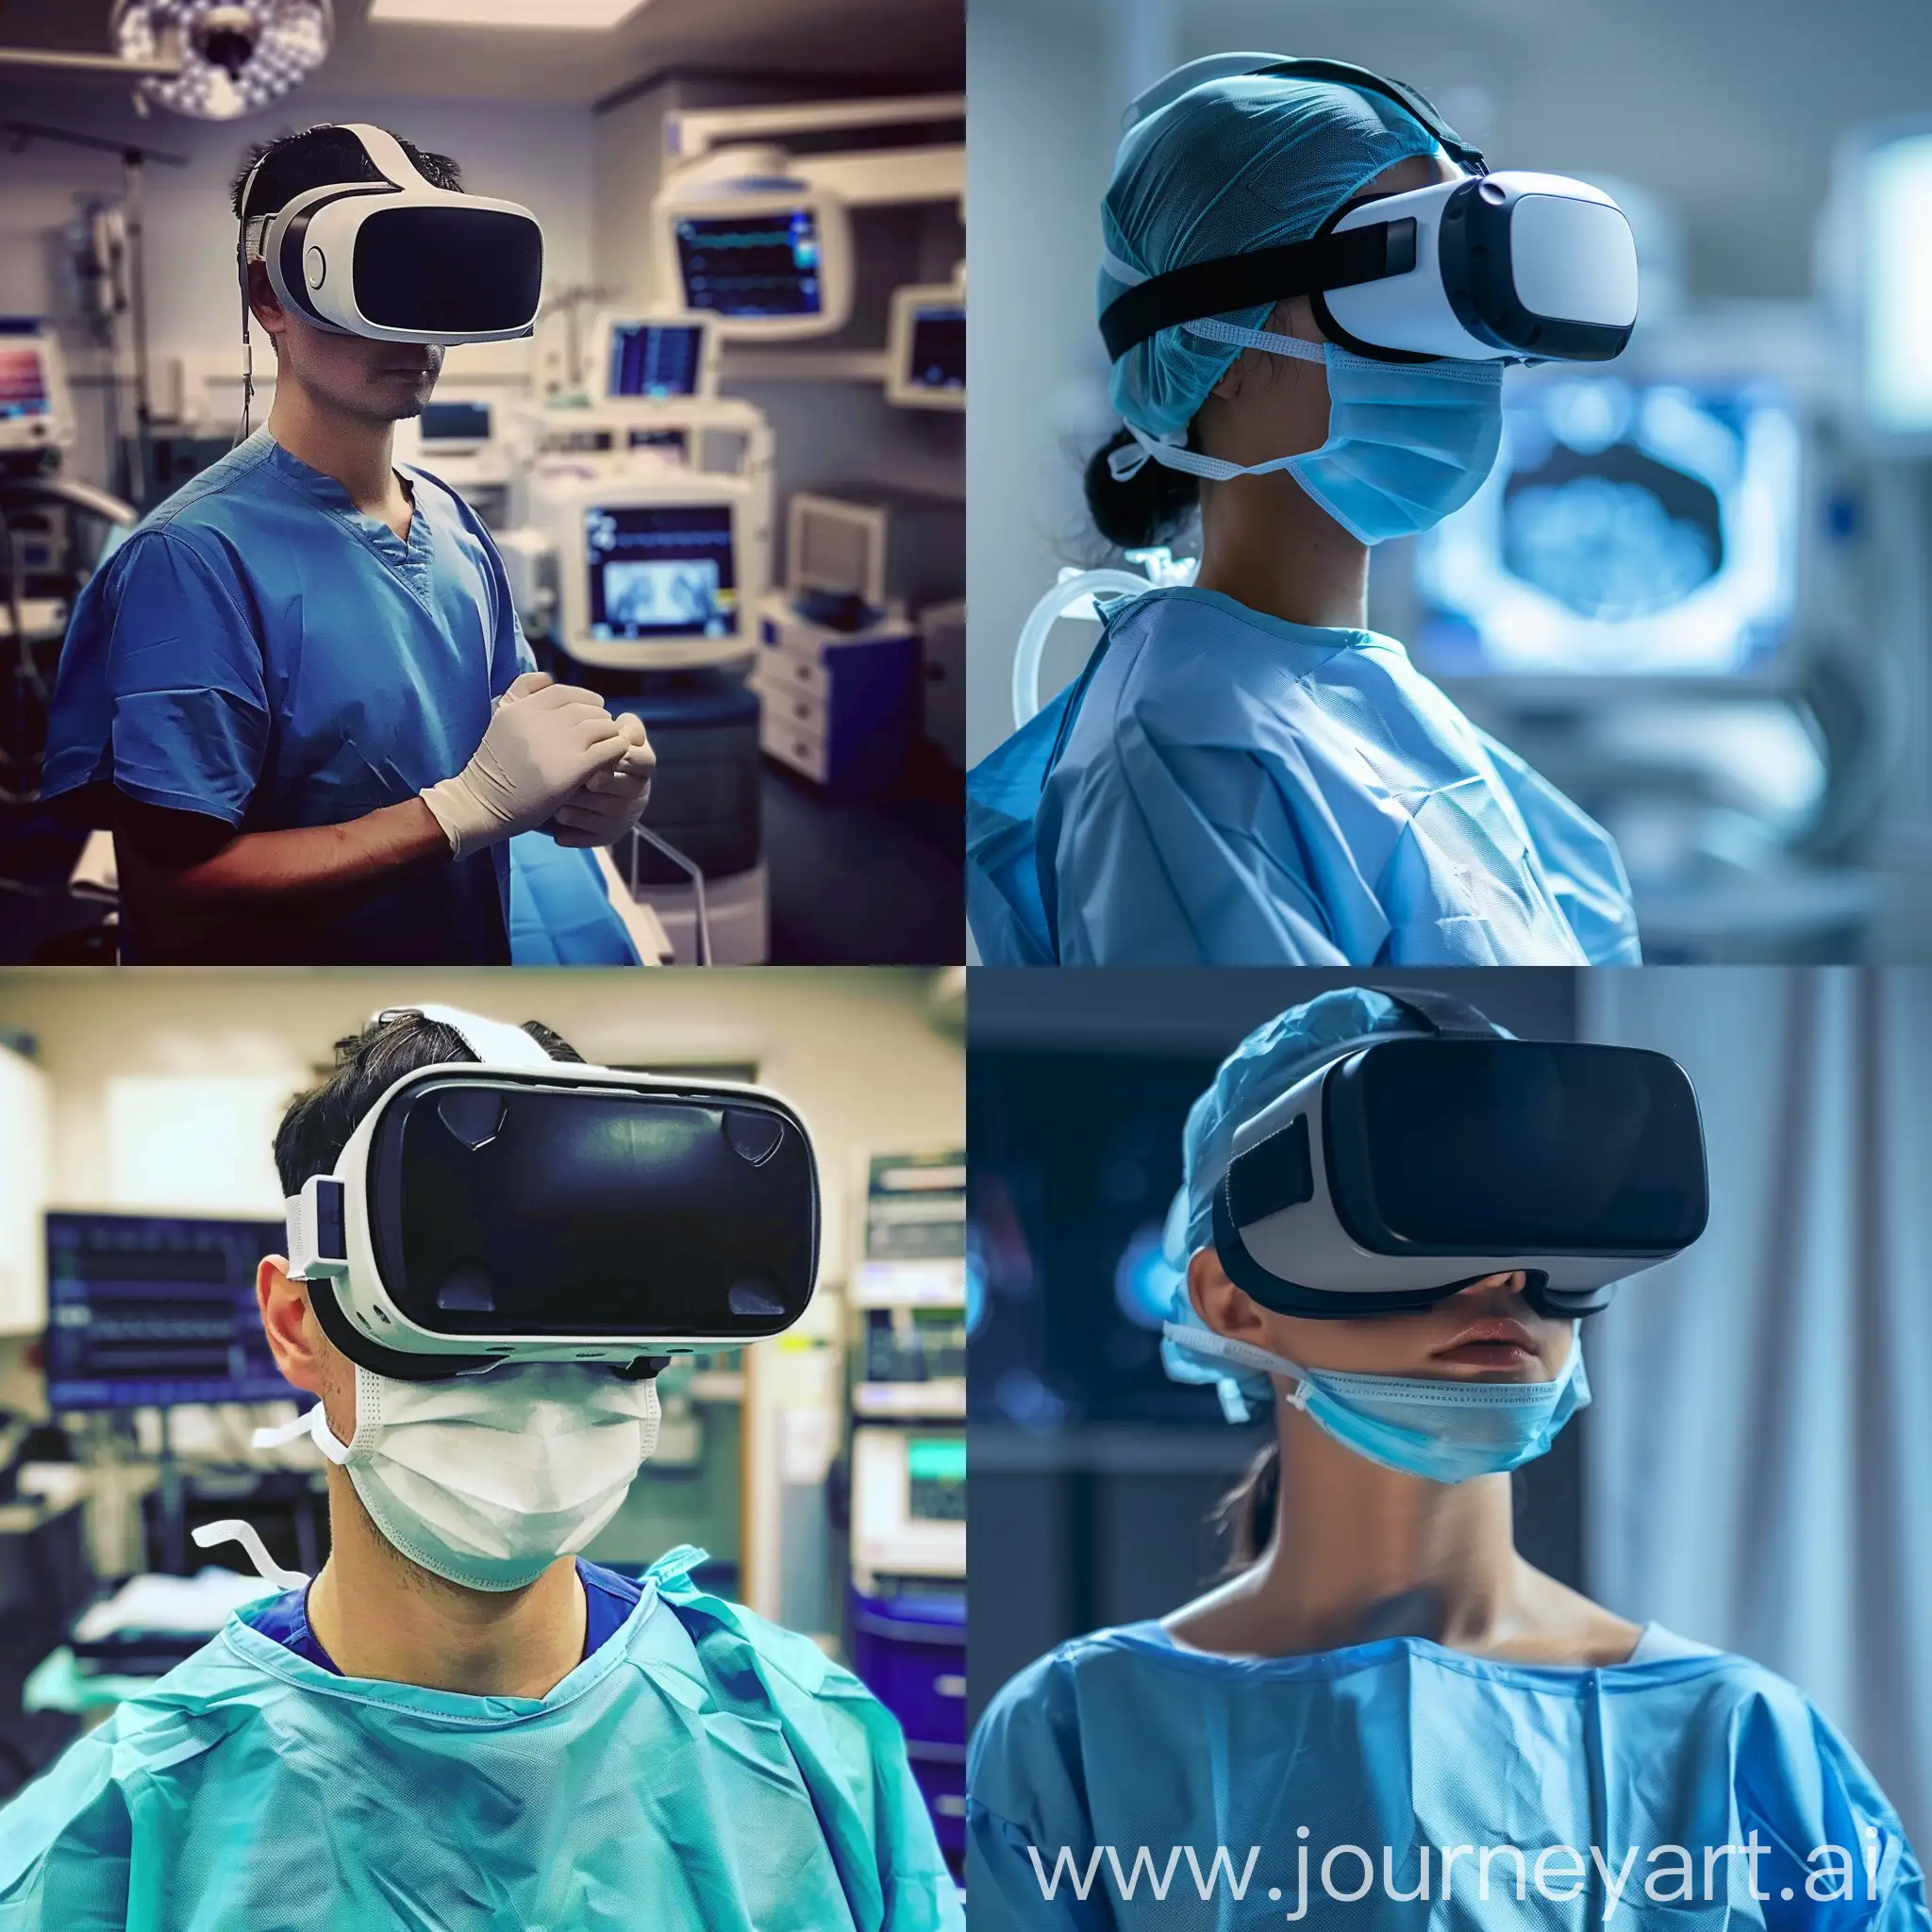 Immersive-Surgical-Training-VR-Simulator-with-11-Augmented-Reality